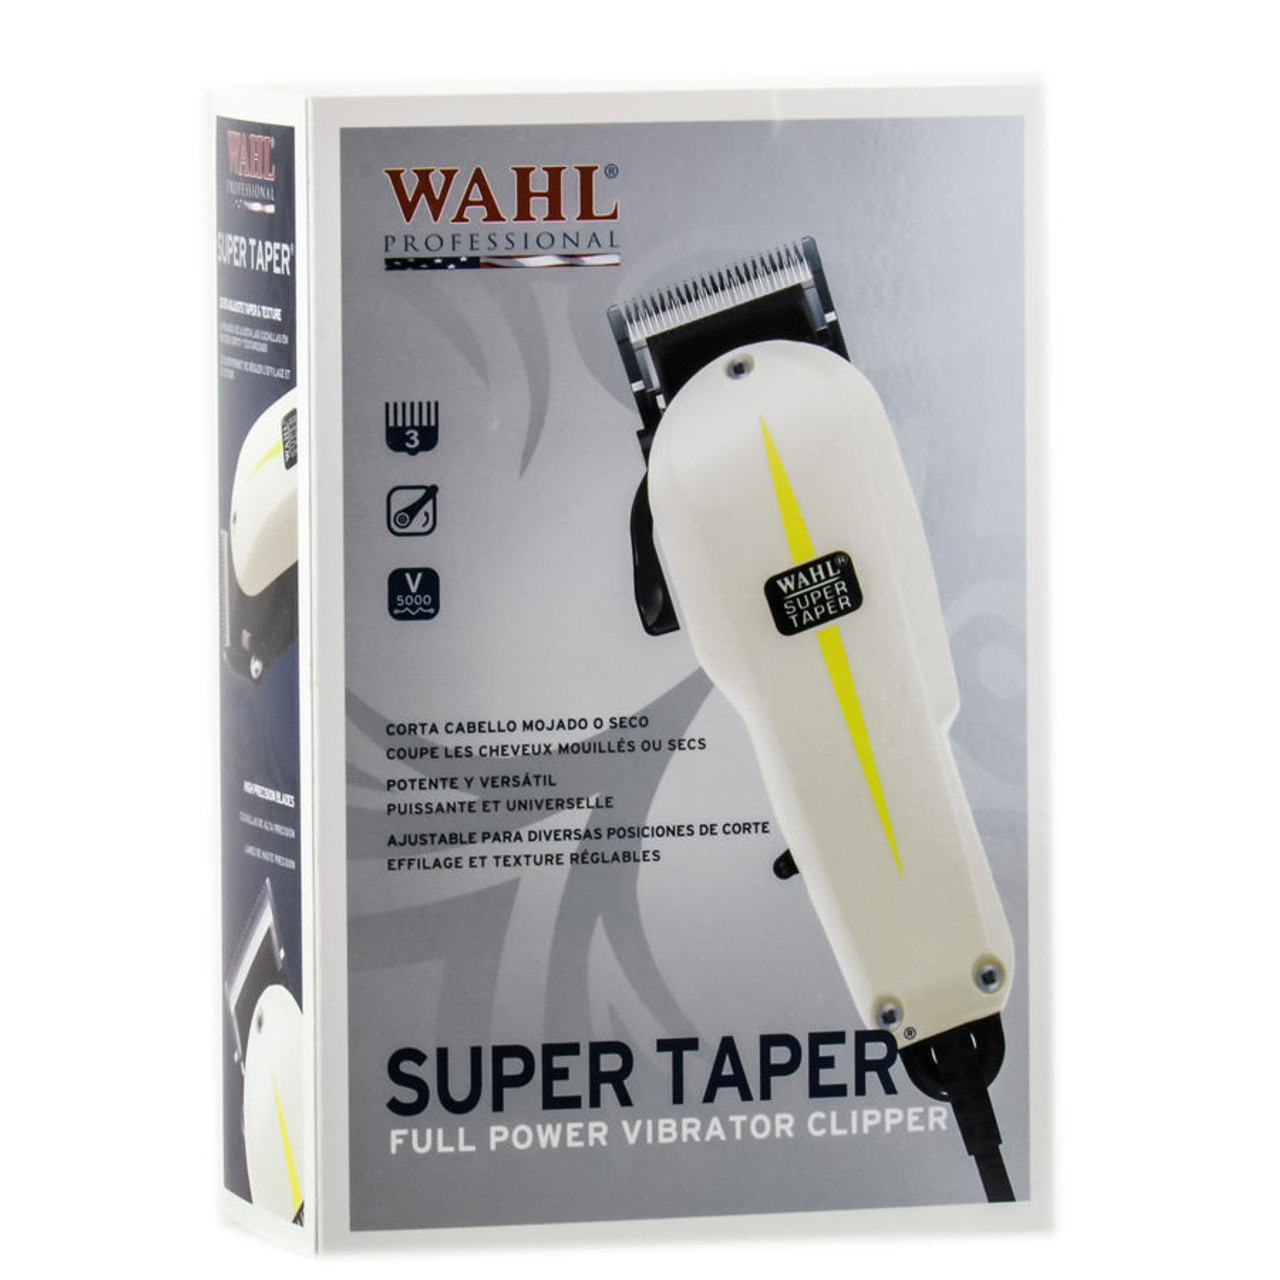 Wahl Professional Super Taper II Hair Clipper - Full Clipper with Ultra  Powerful V5000 Electromagnetic Motor and 8 Colored Guide Combs for